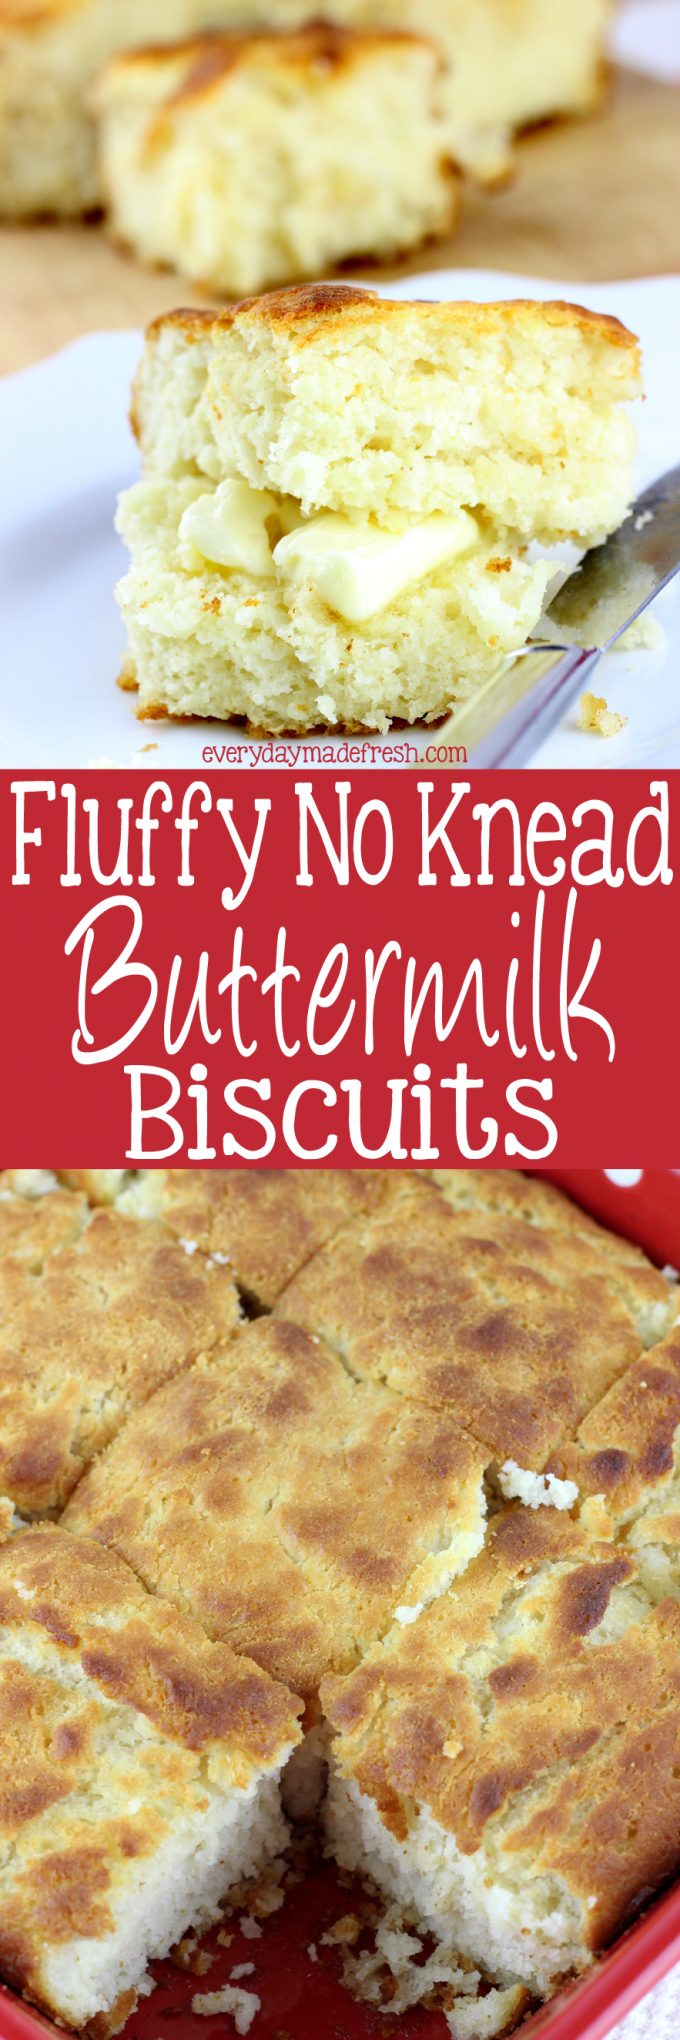 Achieve perfect biscuits every time with this recipe for Fluffy No Knead Buttermilk Biscuits. | EverydayMadeFresh.com